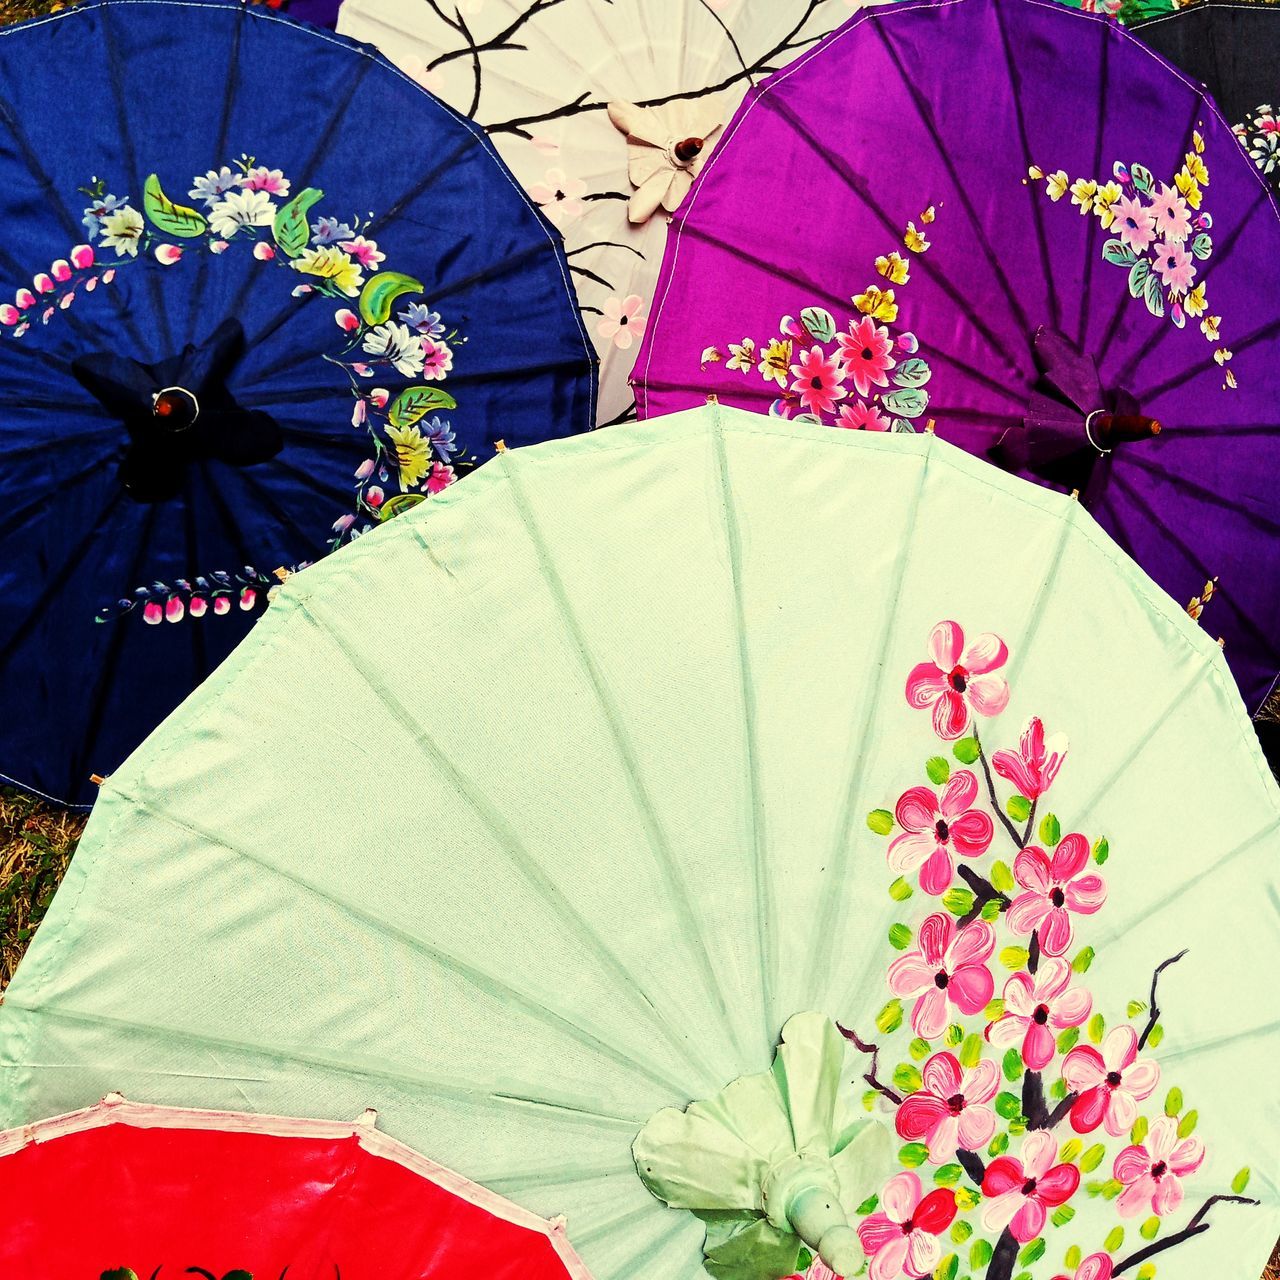 umbrella, protection, fashion accessory, flower, security, parasol, multi colored, nature, no people, day, pattern, outdoors, hand fan, plant, tradition